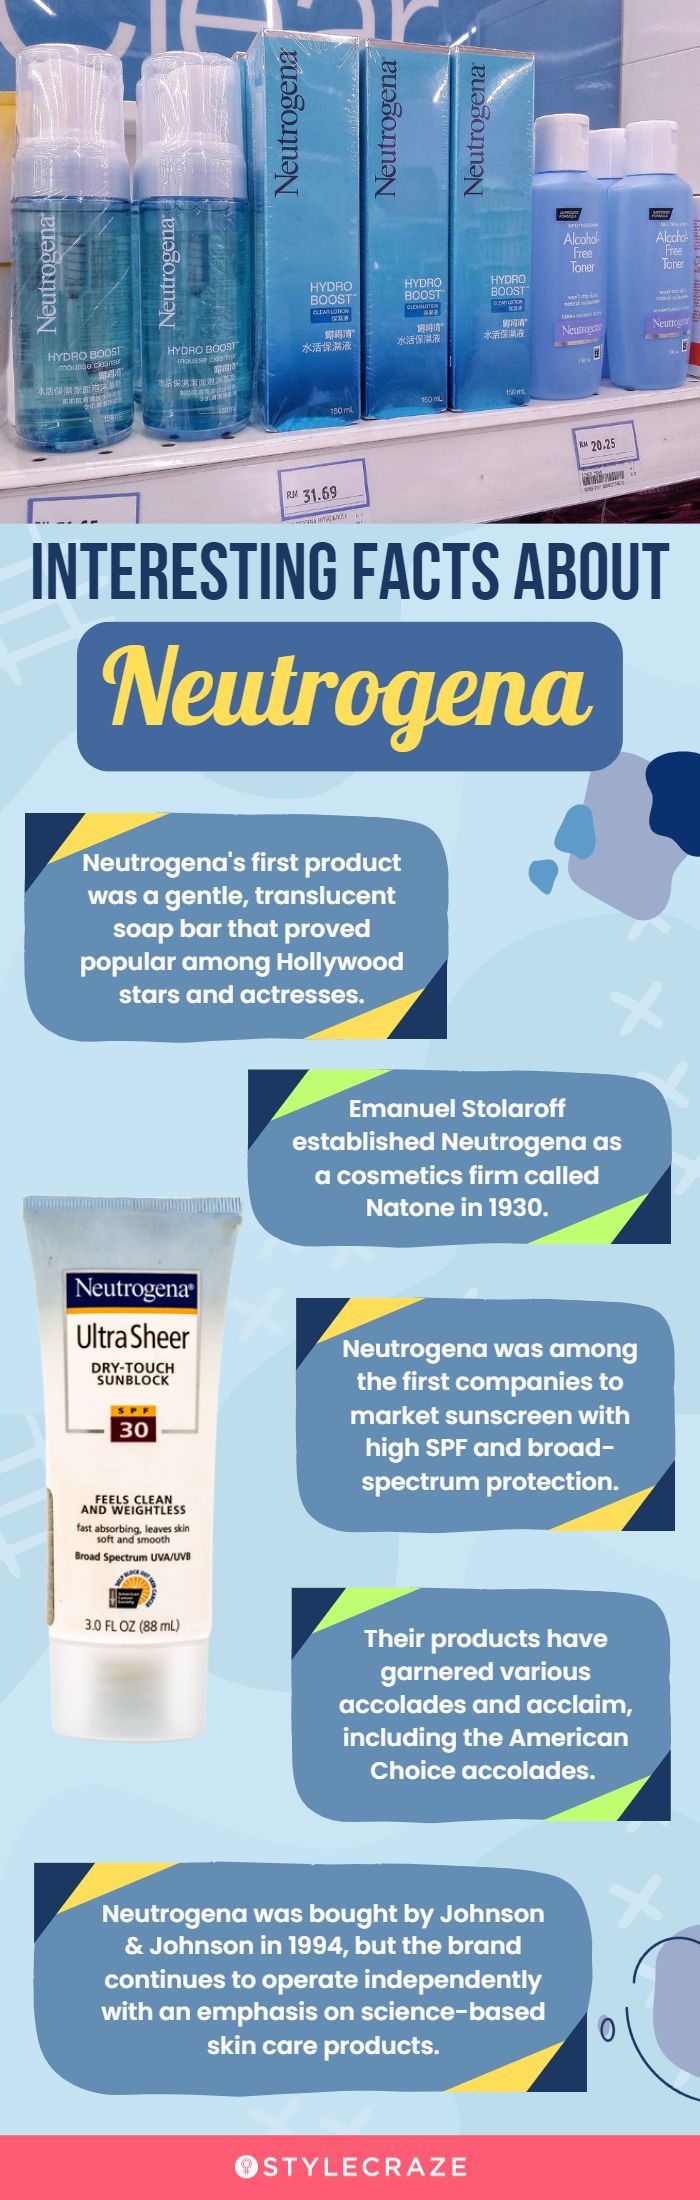 Interesting Facts About Neutrogena (infographic)